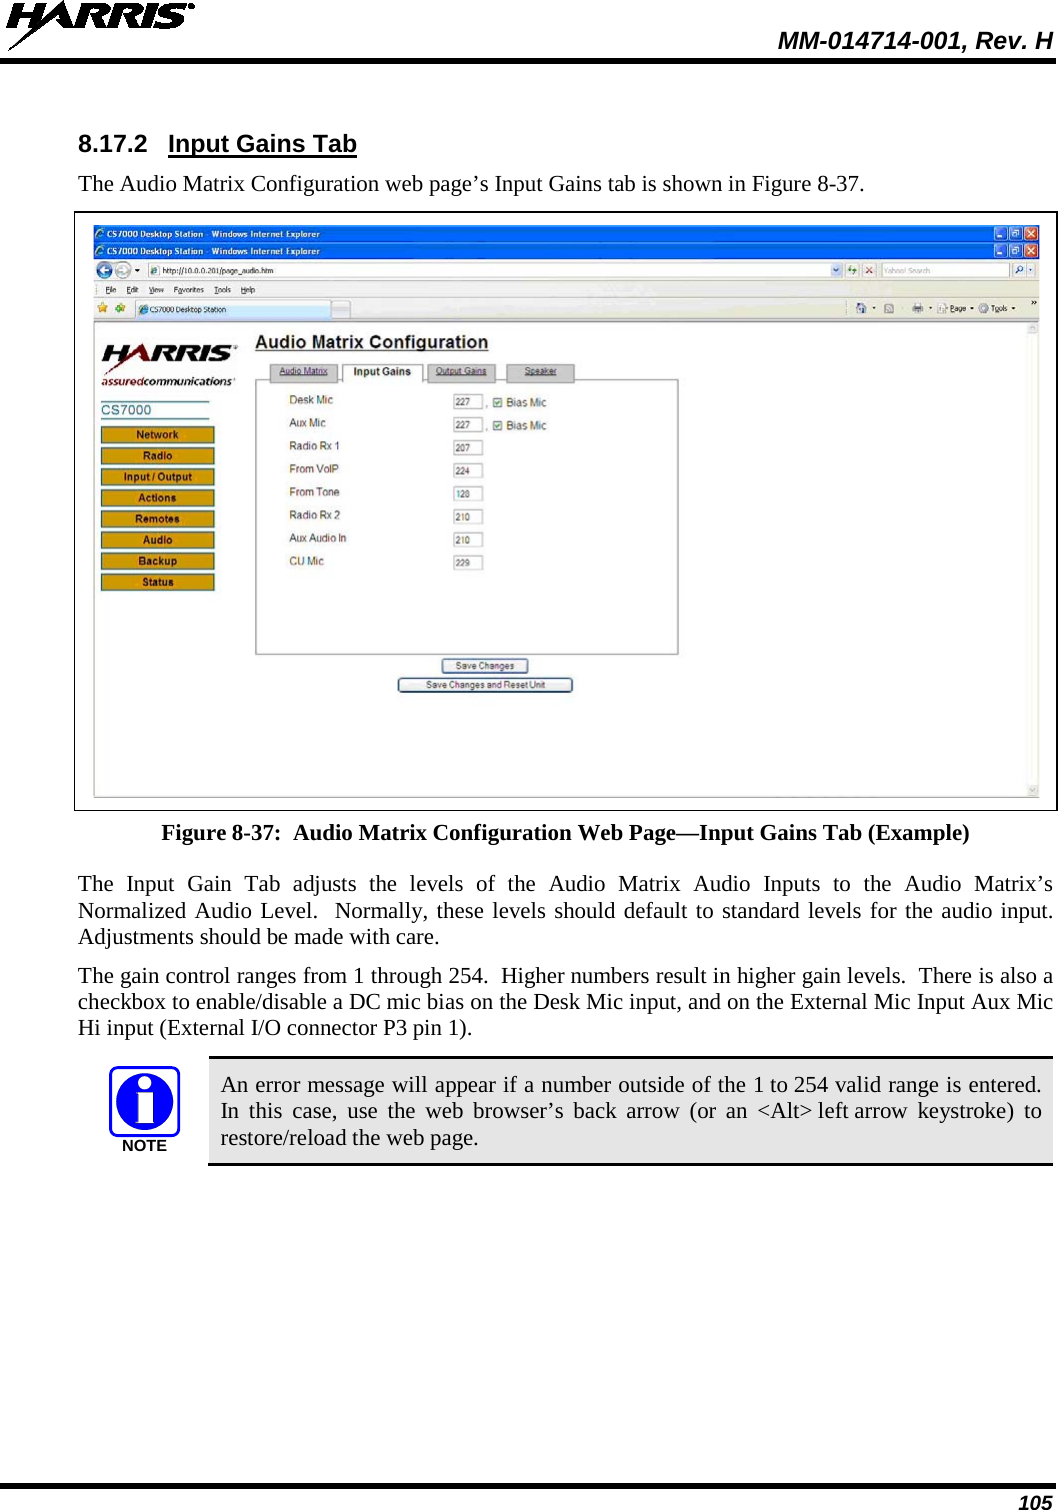  MM-014714-001, Rev. H 105  8.17.2 Input Gains Tab The Audio Matrix Configuration web page’s Input Gains tab is shown in Figure 8-37.   Figure 8-37:  Audio Matrix Configuration Web Page—Input Gains Tab (Example) The Input Gain Tab adjusts the levels of the Audio Matrix Audio Inputs to the Audio Matrix’s Normalized Audio Level.  Normally, these levels should default to standard levels for the audio input.  Adjustments should be made with care. The gain control ranges from 1 through 254.  Higher numbers result in higher gain levels.  There is also a checkbox to enable/disable a DC mic bias on the Desk Mic input, and on the External Mic Input Aux Mic Hi input (External I/O connector P3 pin 1).   An error message will appear if a number outside of the 1 to 254 valid range is entered. In this case, use the web browser’s back arrow (or an &lt;Alt&gt; left arrow keystroke) to restore/reload the web page. NOTE